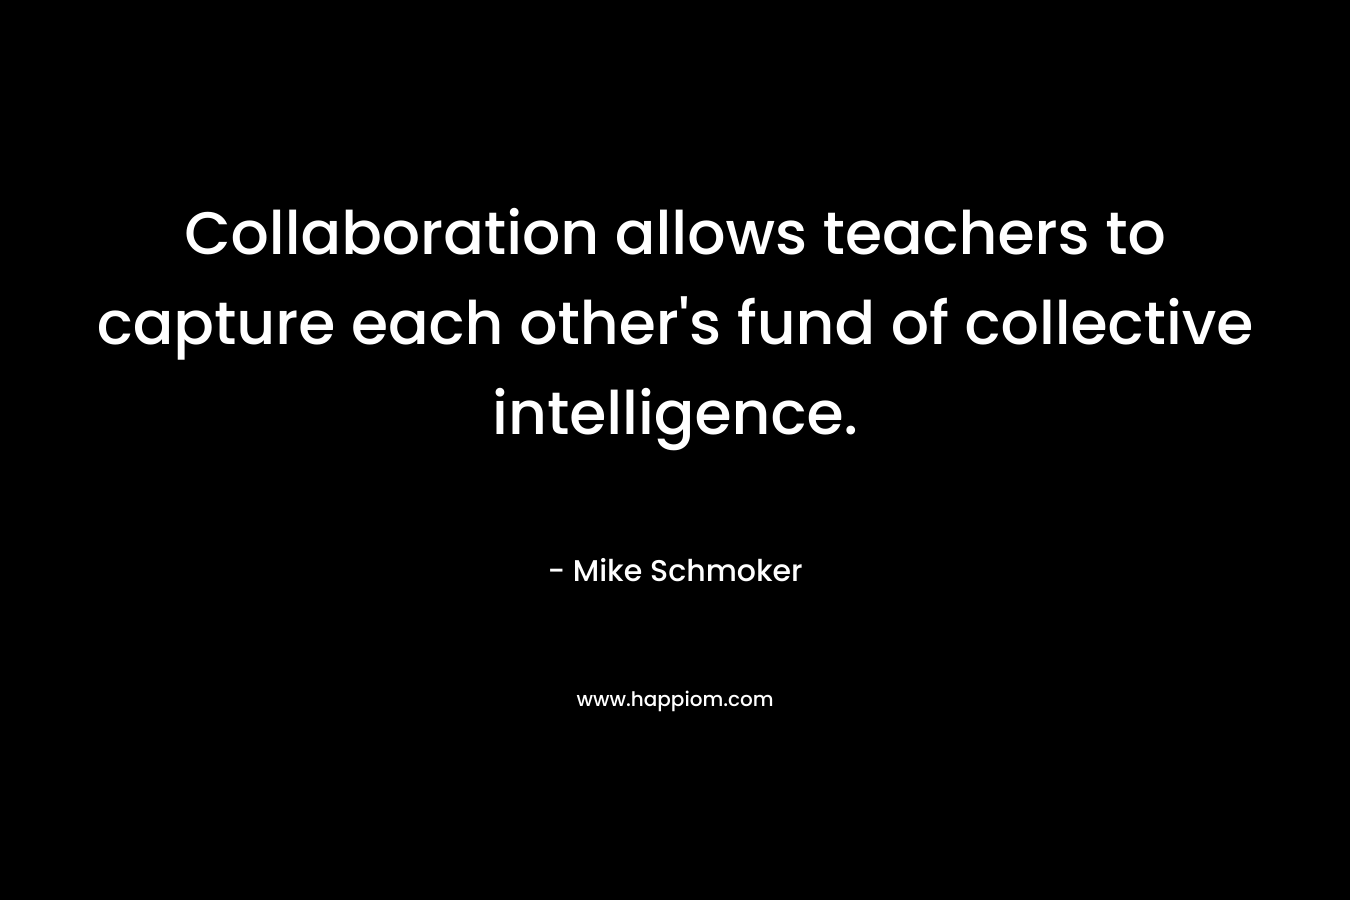 Collaboration allows teachers to capture each other's fund of collective intelligence.